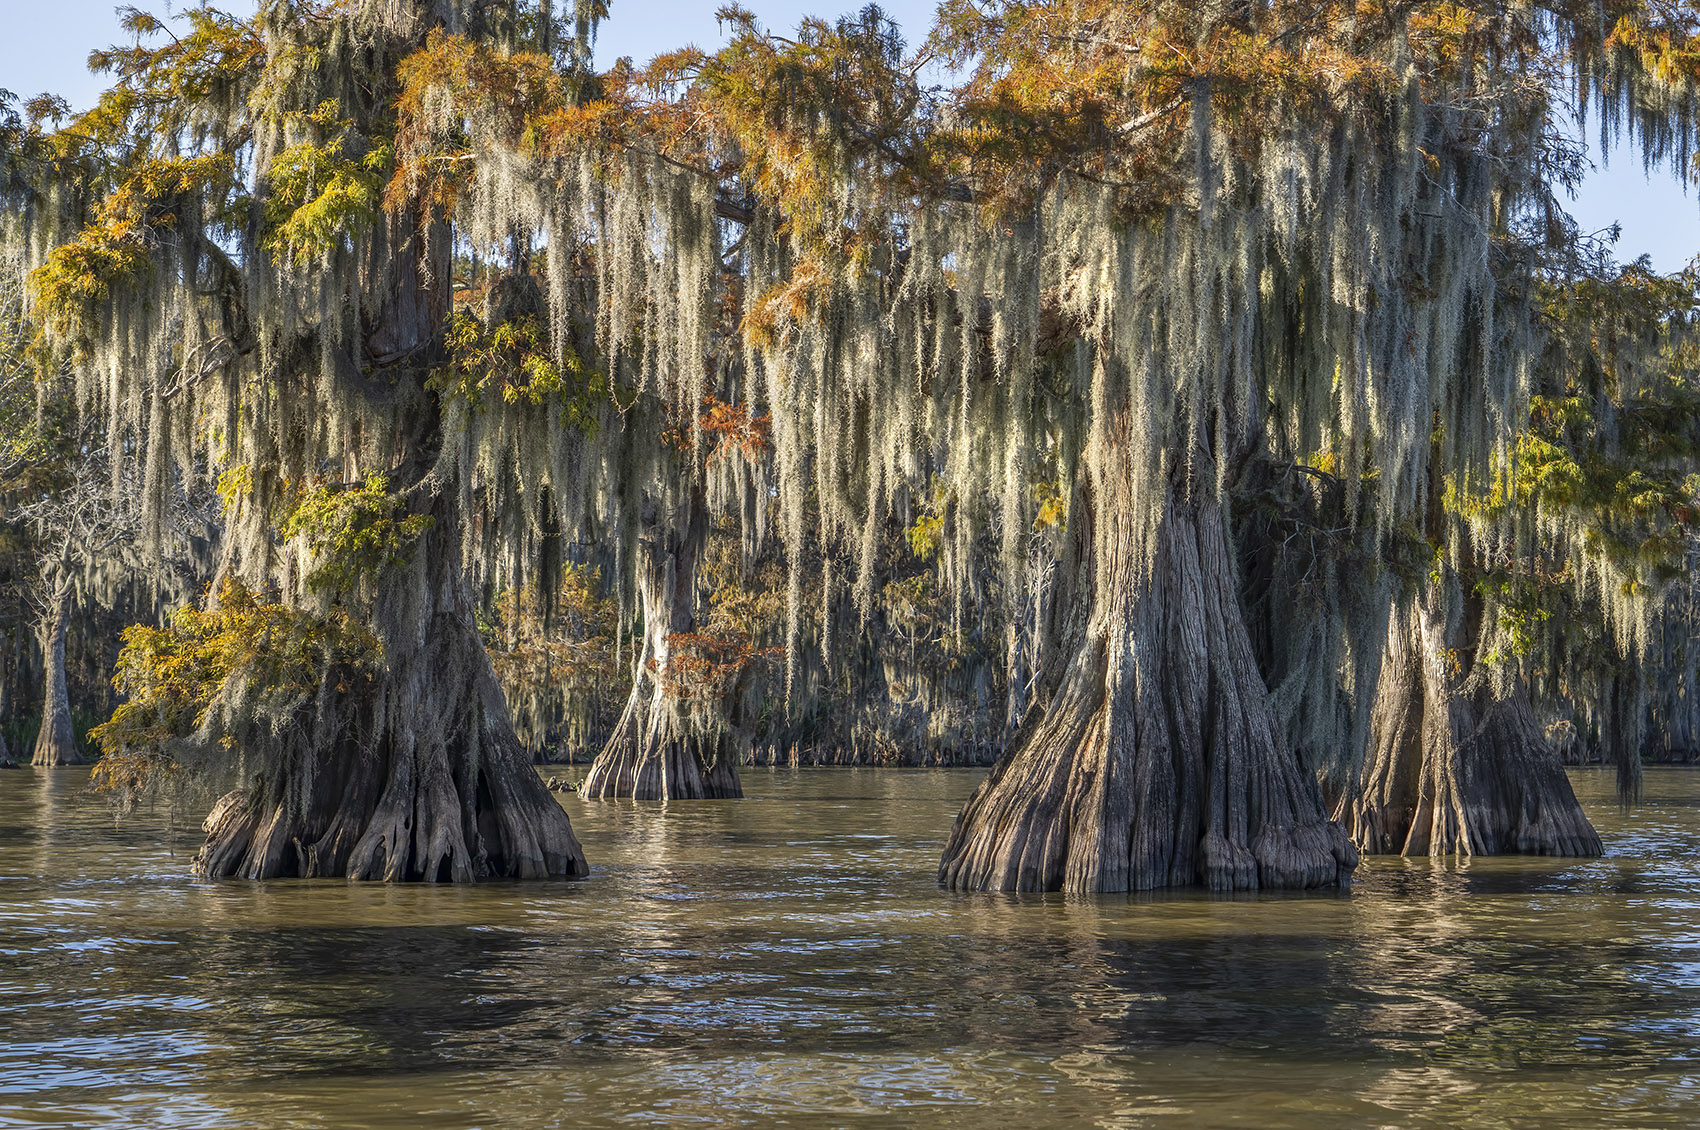 Bald cypress trees with fall color in water